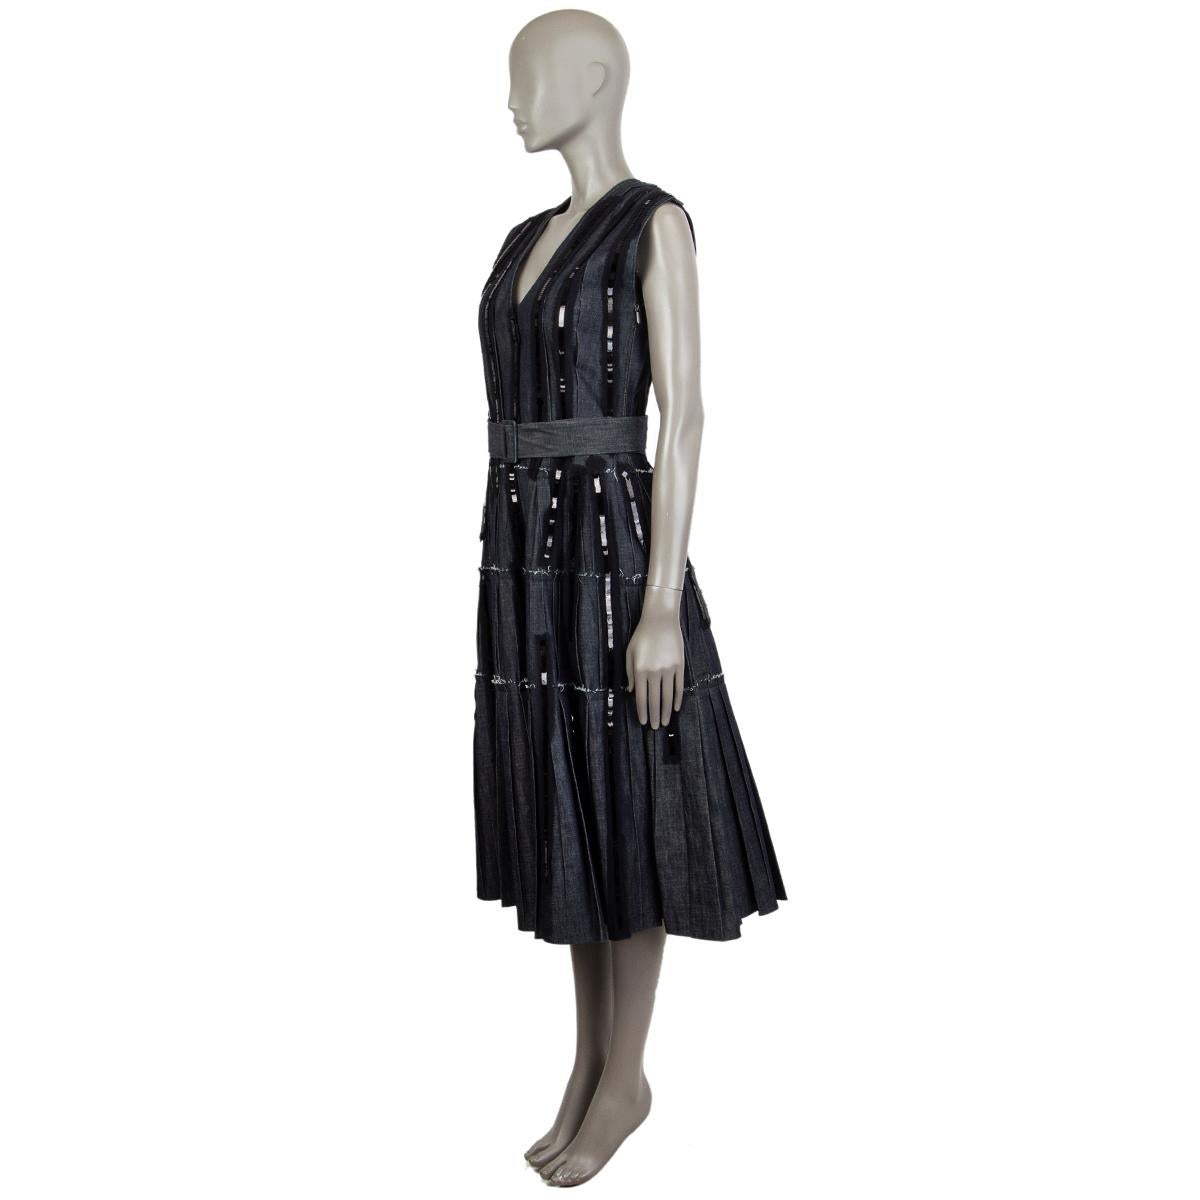 100% authentic Bottega Veneta sleeveless belted midi dress in indigo cotton (100%) with a v-neck and black sequin with polyester embroidered details. Has a deep-v open back. Comes with a matching belt and bra cups. Closes on the side with a zipper.